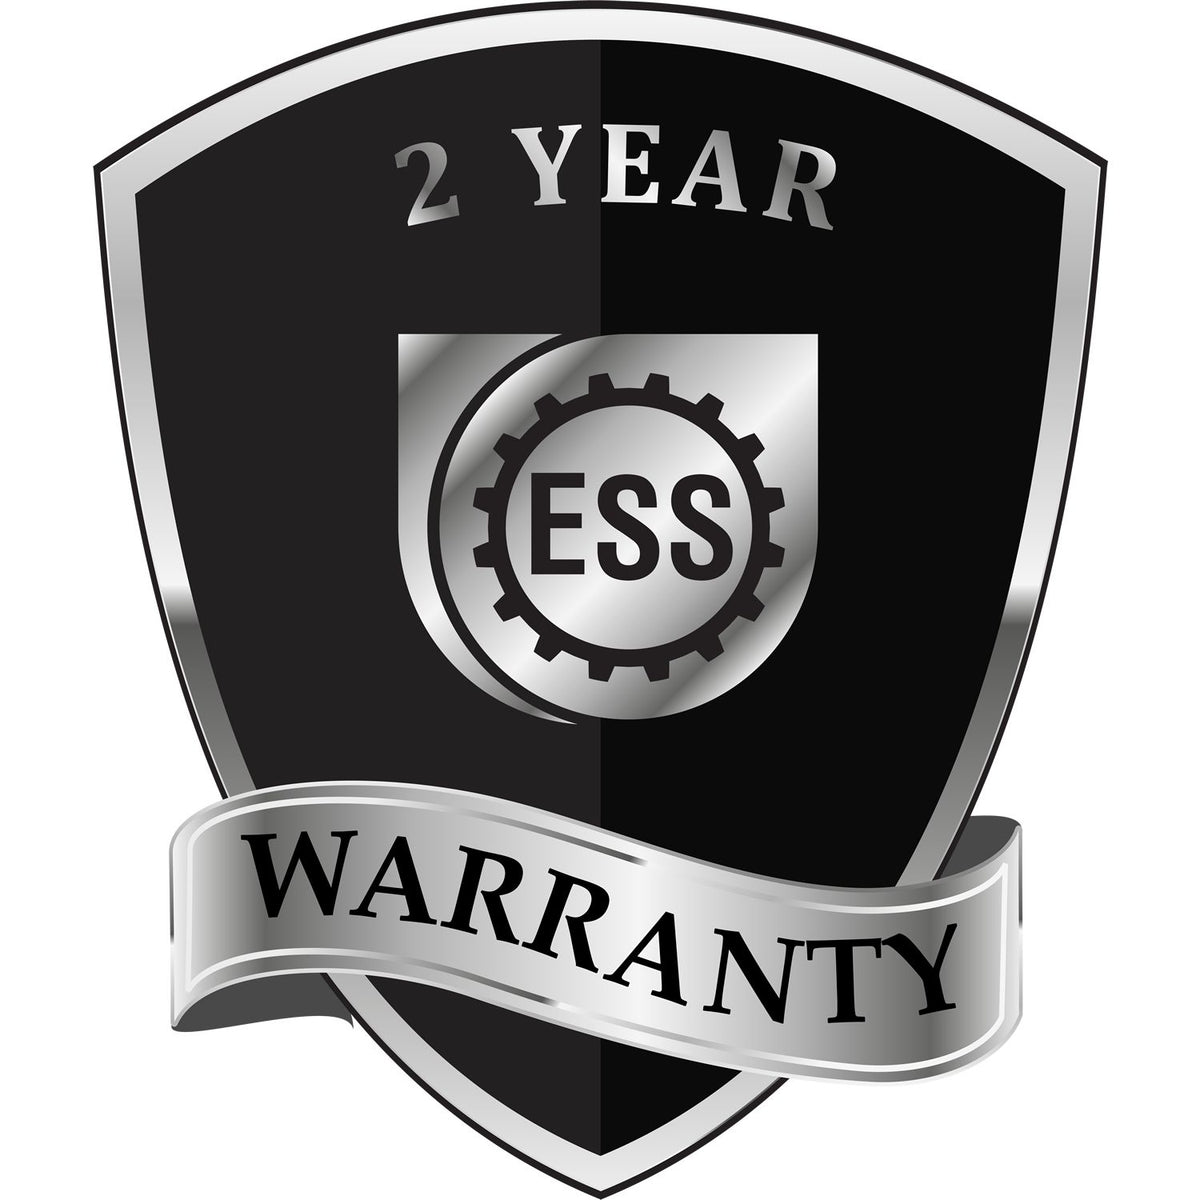 A badge or emblem showing a warranty icon for the Long Reach Kansas PE Seal